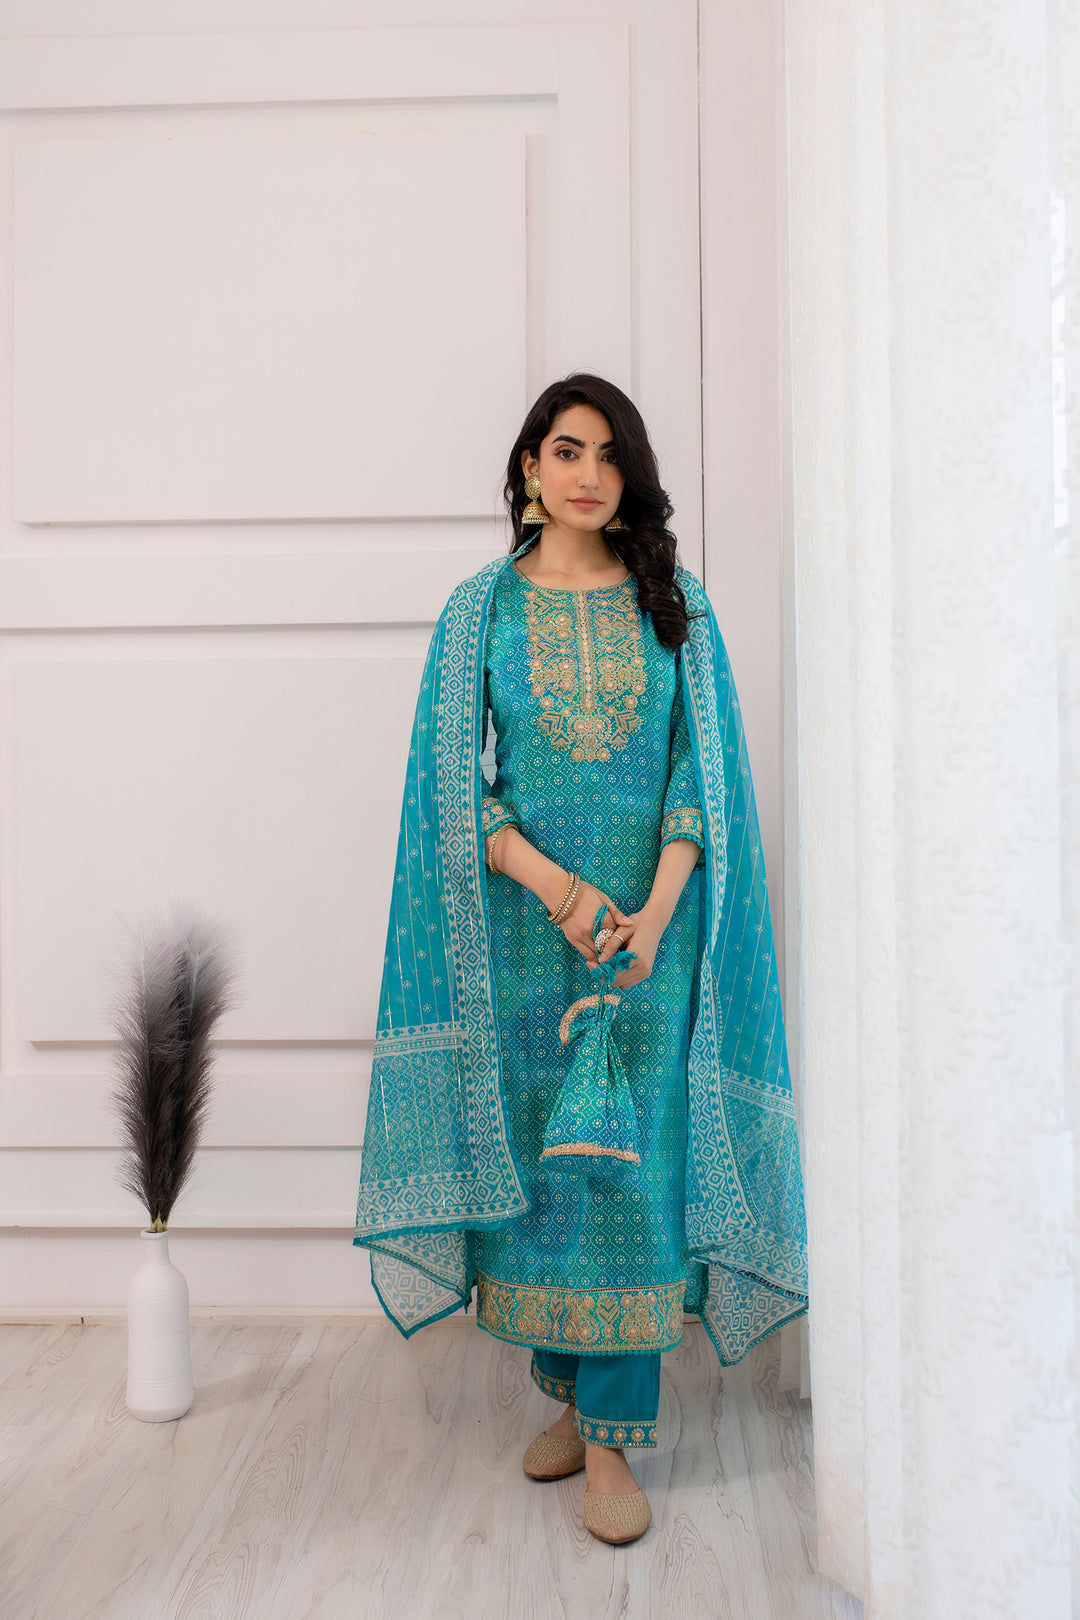 Women's Rayon Turquoise or Green Straight Kurta, Pant and Dupatta With Fancy Potli Set